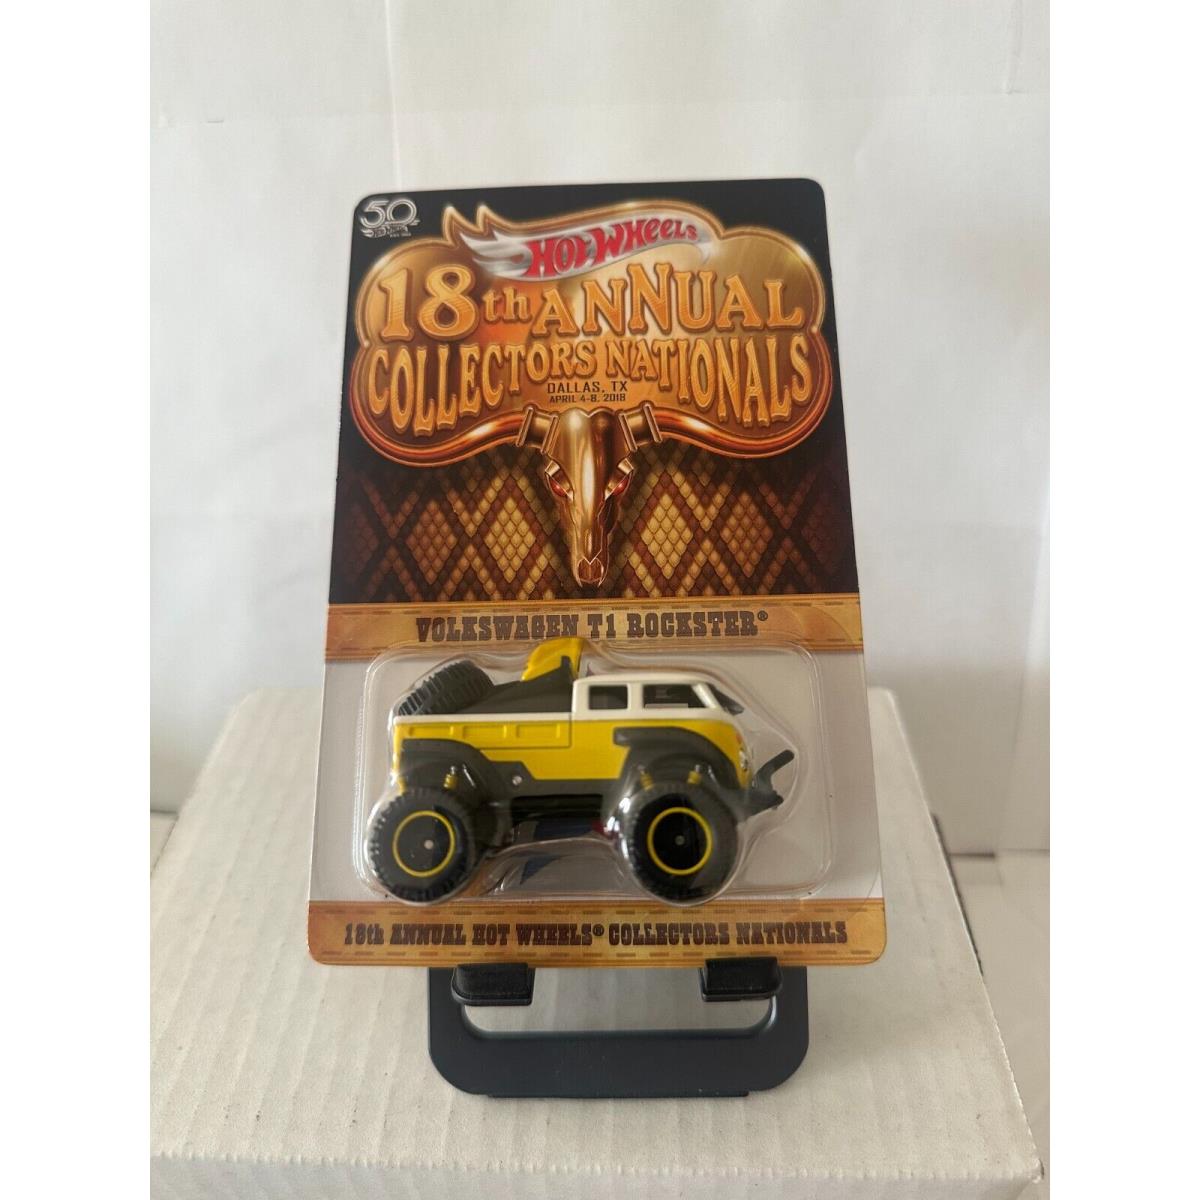 Hot Wheels 18th Annual Collectors Nationals Volkswagen T1 Rockster V17